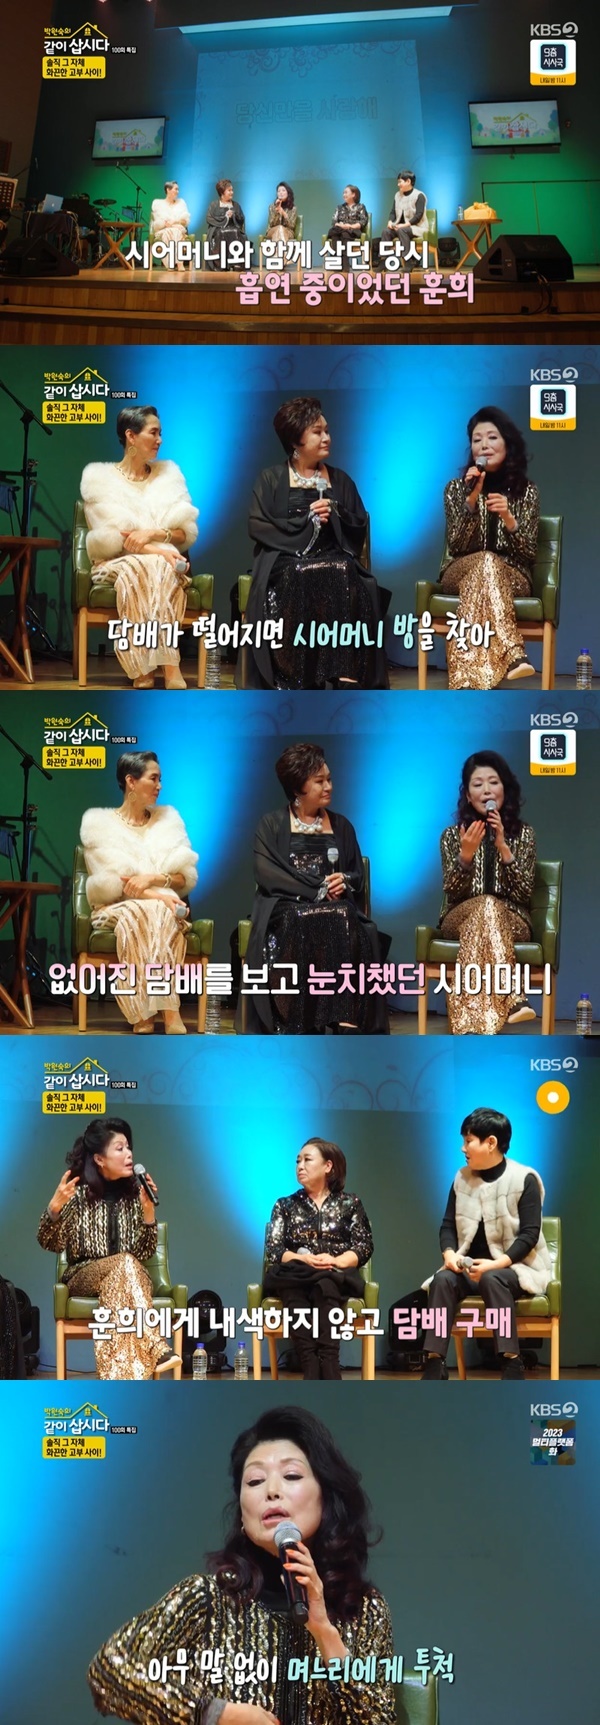 Jung Hoon-hee boasted a cool relationship with mother-in-law and revealed her weight.Singer Jung Hoon-hee appeared in the 100th featured talk concert in Season 3 of KBS 2TV  ⁇  Park Won-sook broadcast on February 14th.On the day of the broadcast, Jung Hoon-hee asked a question about the secret of good relationship, I am a man-like personality, and mother-in-law is a woman.Then, when I lived with Boni mother-in-law for 20 years and smoked tobacco, when tobacco fell, there was a tobacco in my mothers room, so I took some and smoked it.So when Jung Hoon-hee took the tobacco, the mother-in-law said, Hes out of tobacco. He said nothing, went to the supermarket in front of the house, bought a tobacco, opened the door and threw a tobacco.Jung Hoon-hee admired where the mother-in-law was, and then I thanked my mother and thanked her.Park Won-sook was curious about Jung Hoon-hees body and hair thinning secrets, and Jung Hoon-hee said, There are two things that my wife and I are loud. Both are loud. Both have power. Both have a lot of hair.